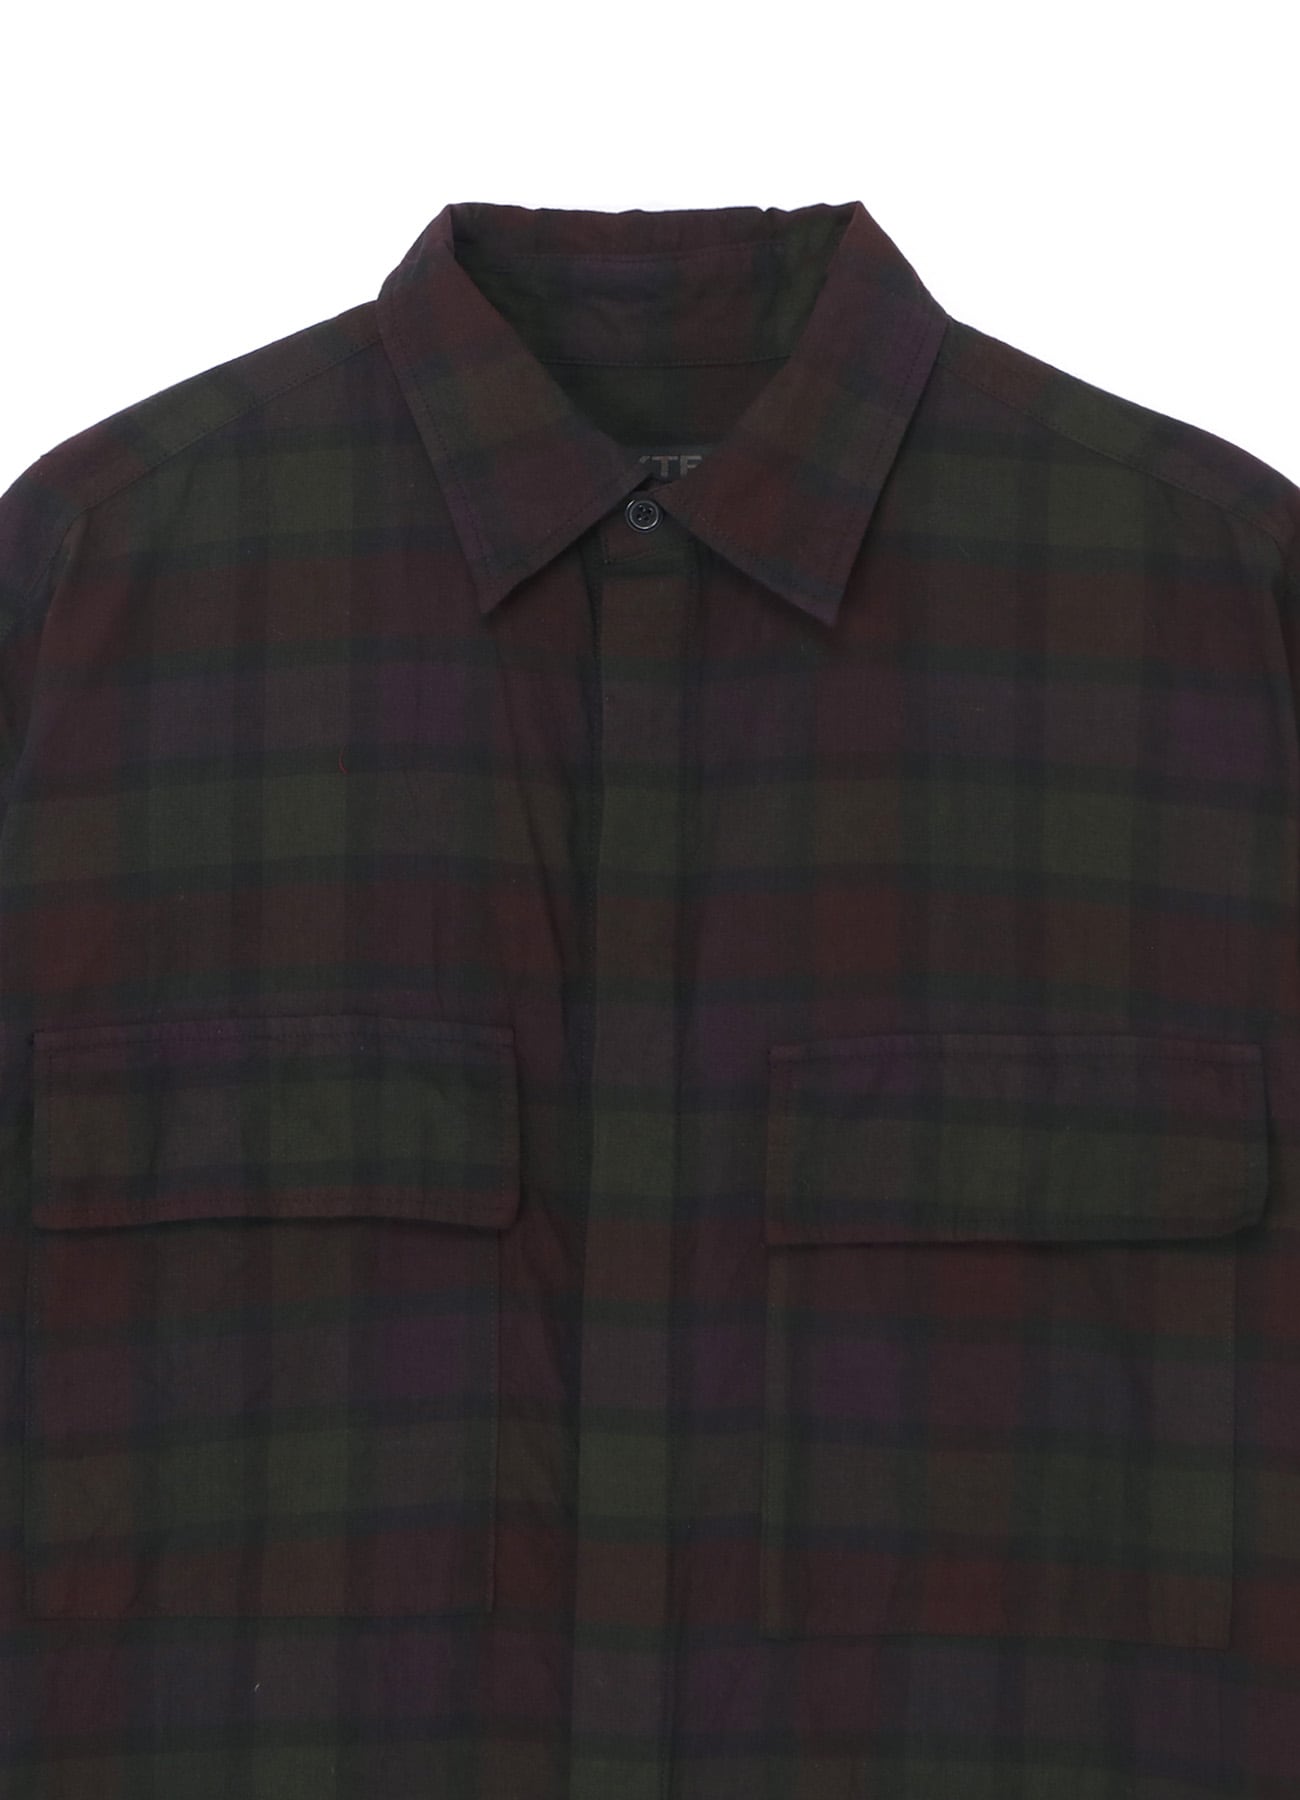 INDIAN MADRAS CHECK TIE-DIE HALF-SLEEVE BIG SHIRT WITH FLAP POCKETS